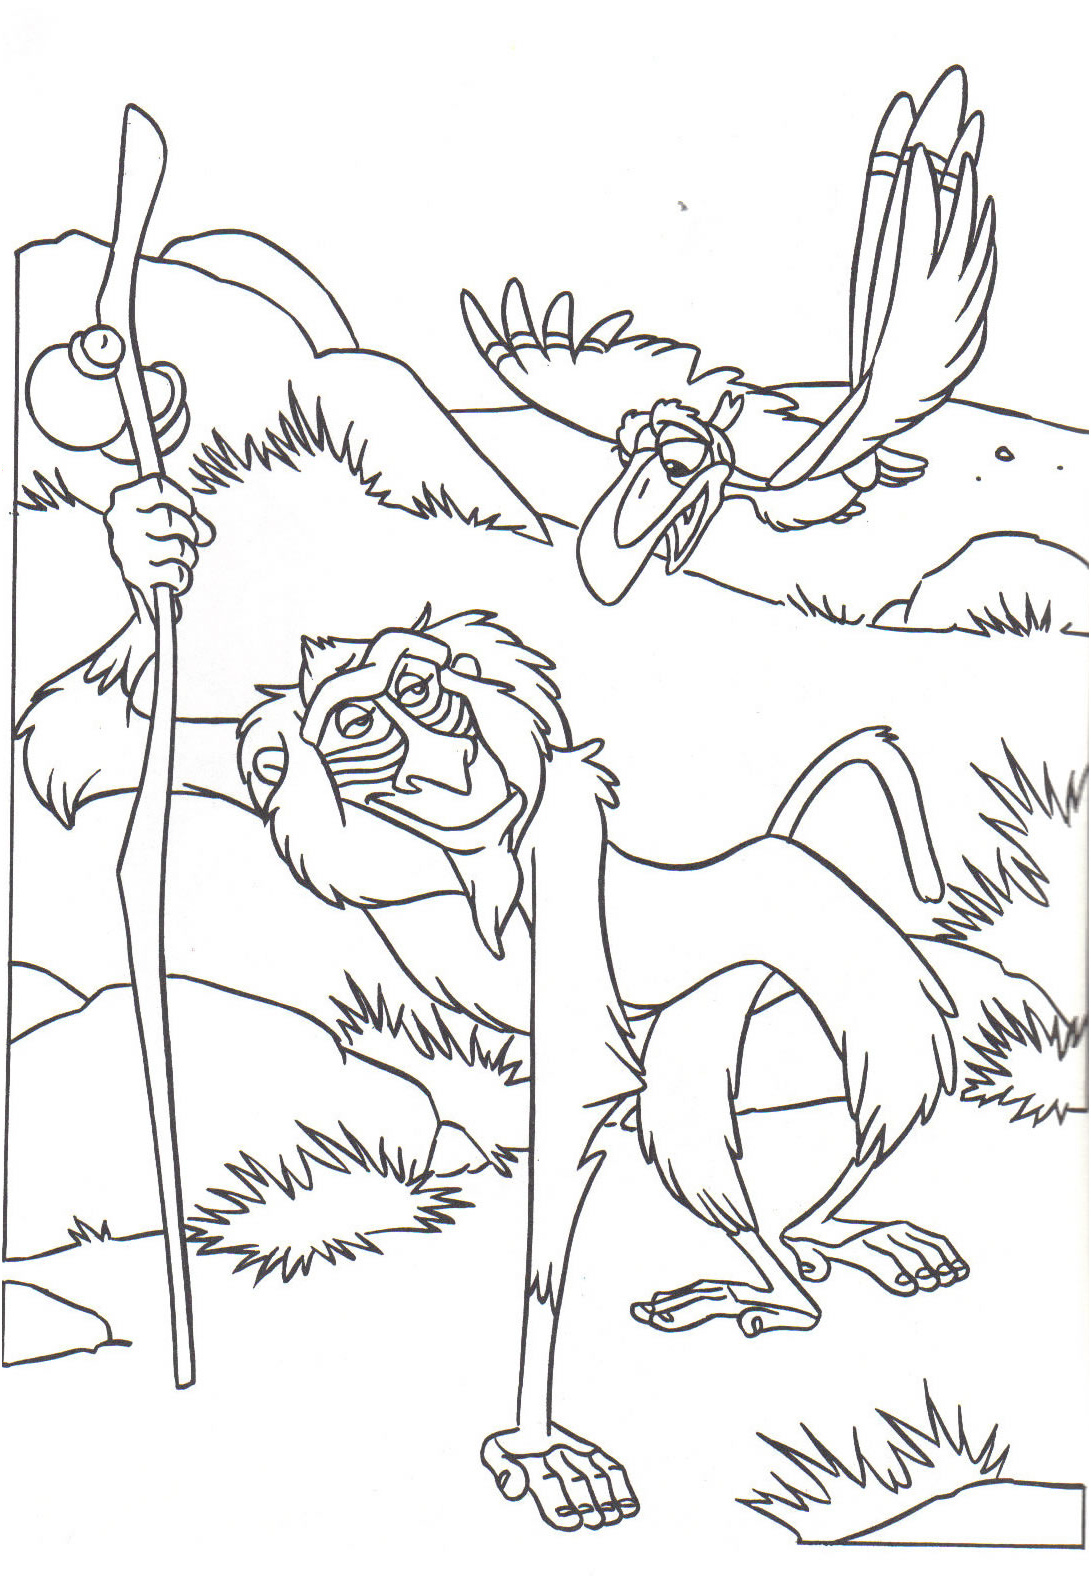 image=the lion king Coloring for kids the lion king 1